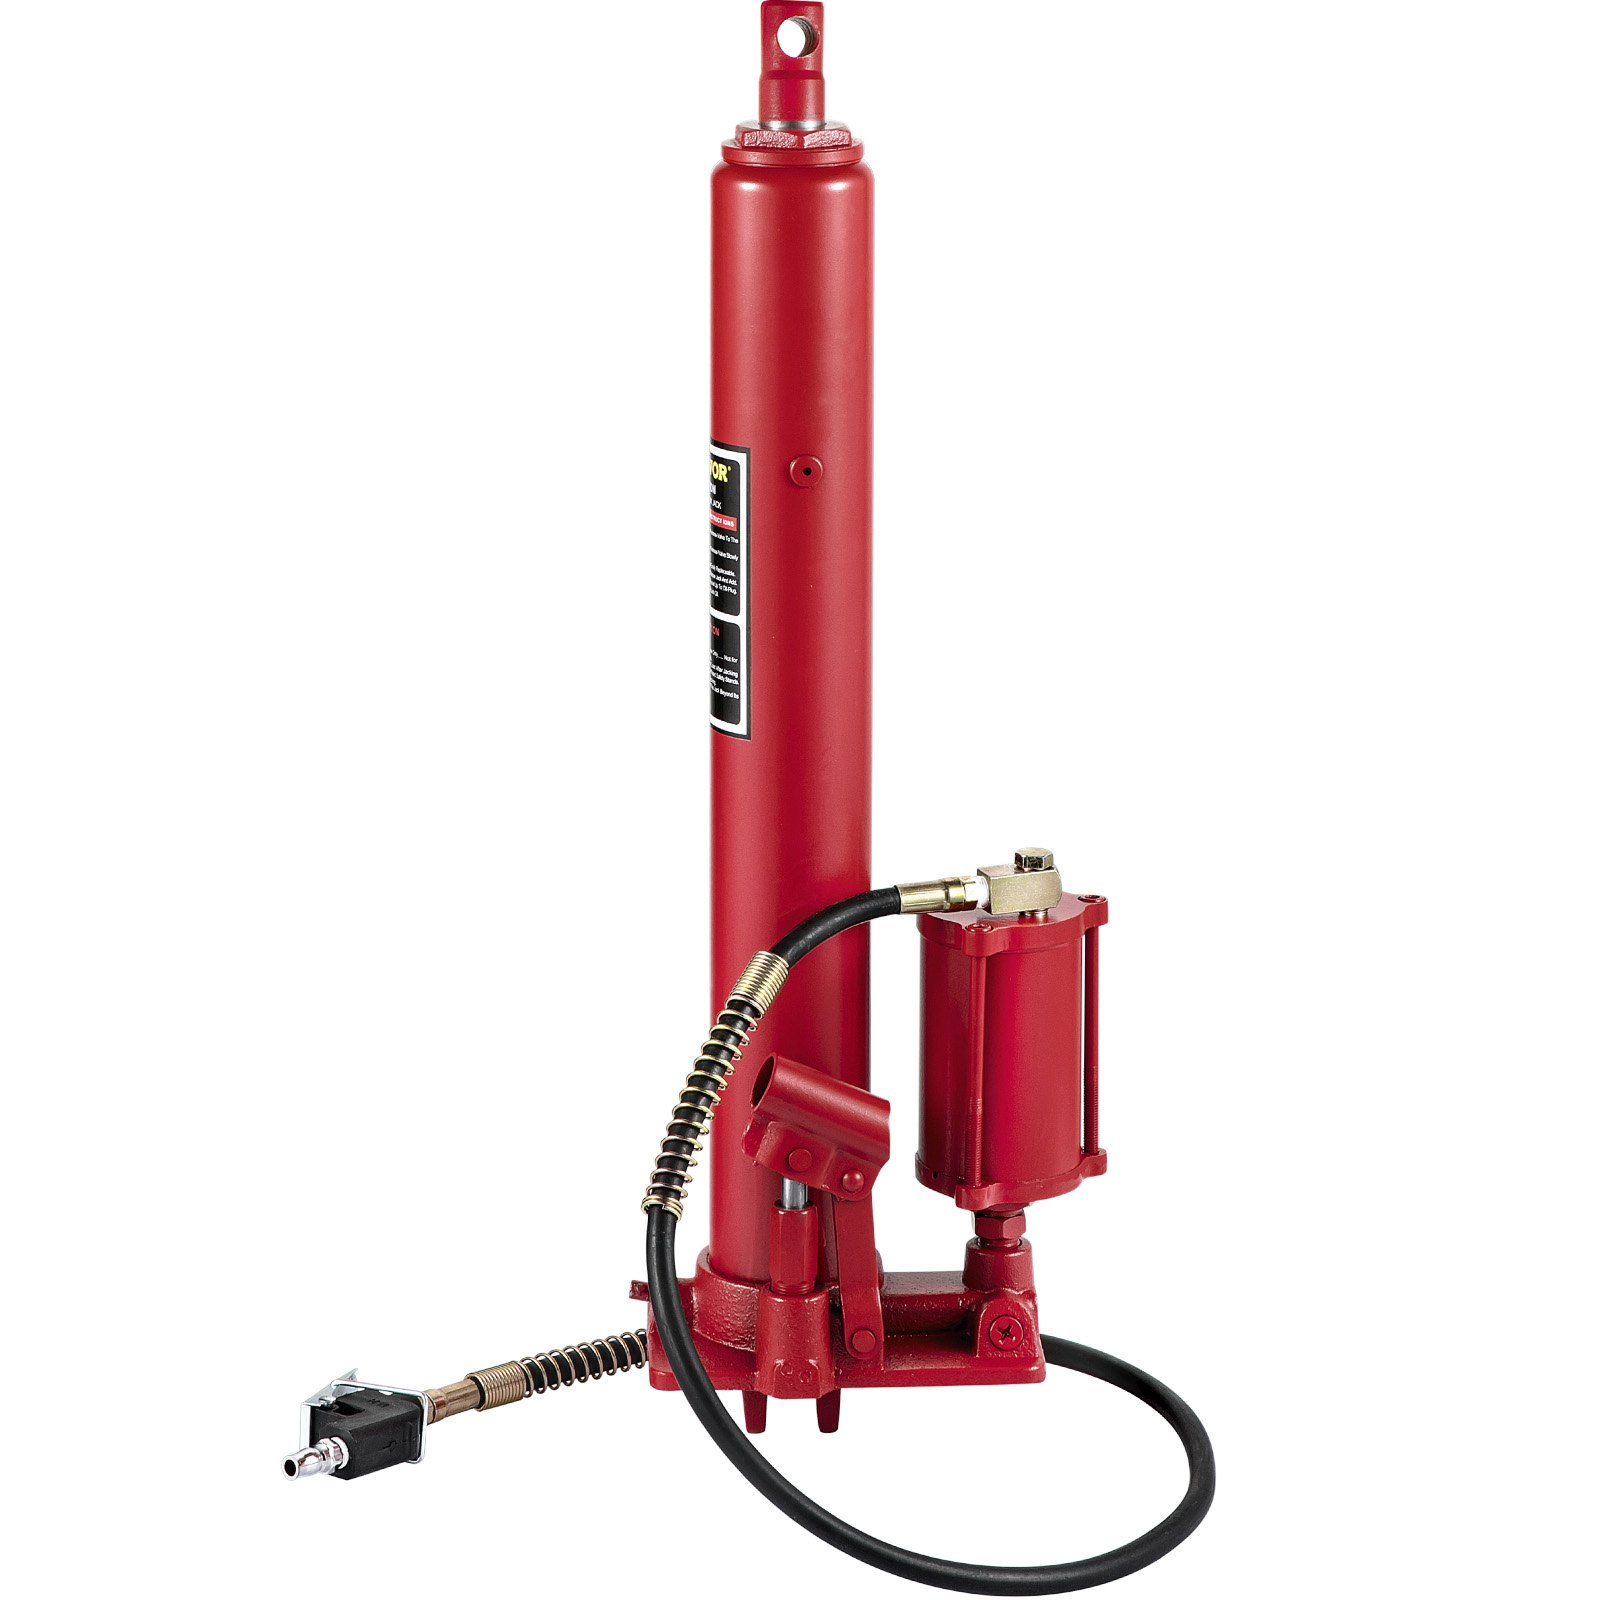 VEVOR Hydraulic/Pneumatic Long Ram Jack, 8 Tons/17363 lbs Capacity, with Single Piston Pump and Clevis Base, Manual Cherry Picker w/Handle, for Garage/Shop Cranes, Engine Lift Hoist, Red, Goodies N Stuff